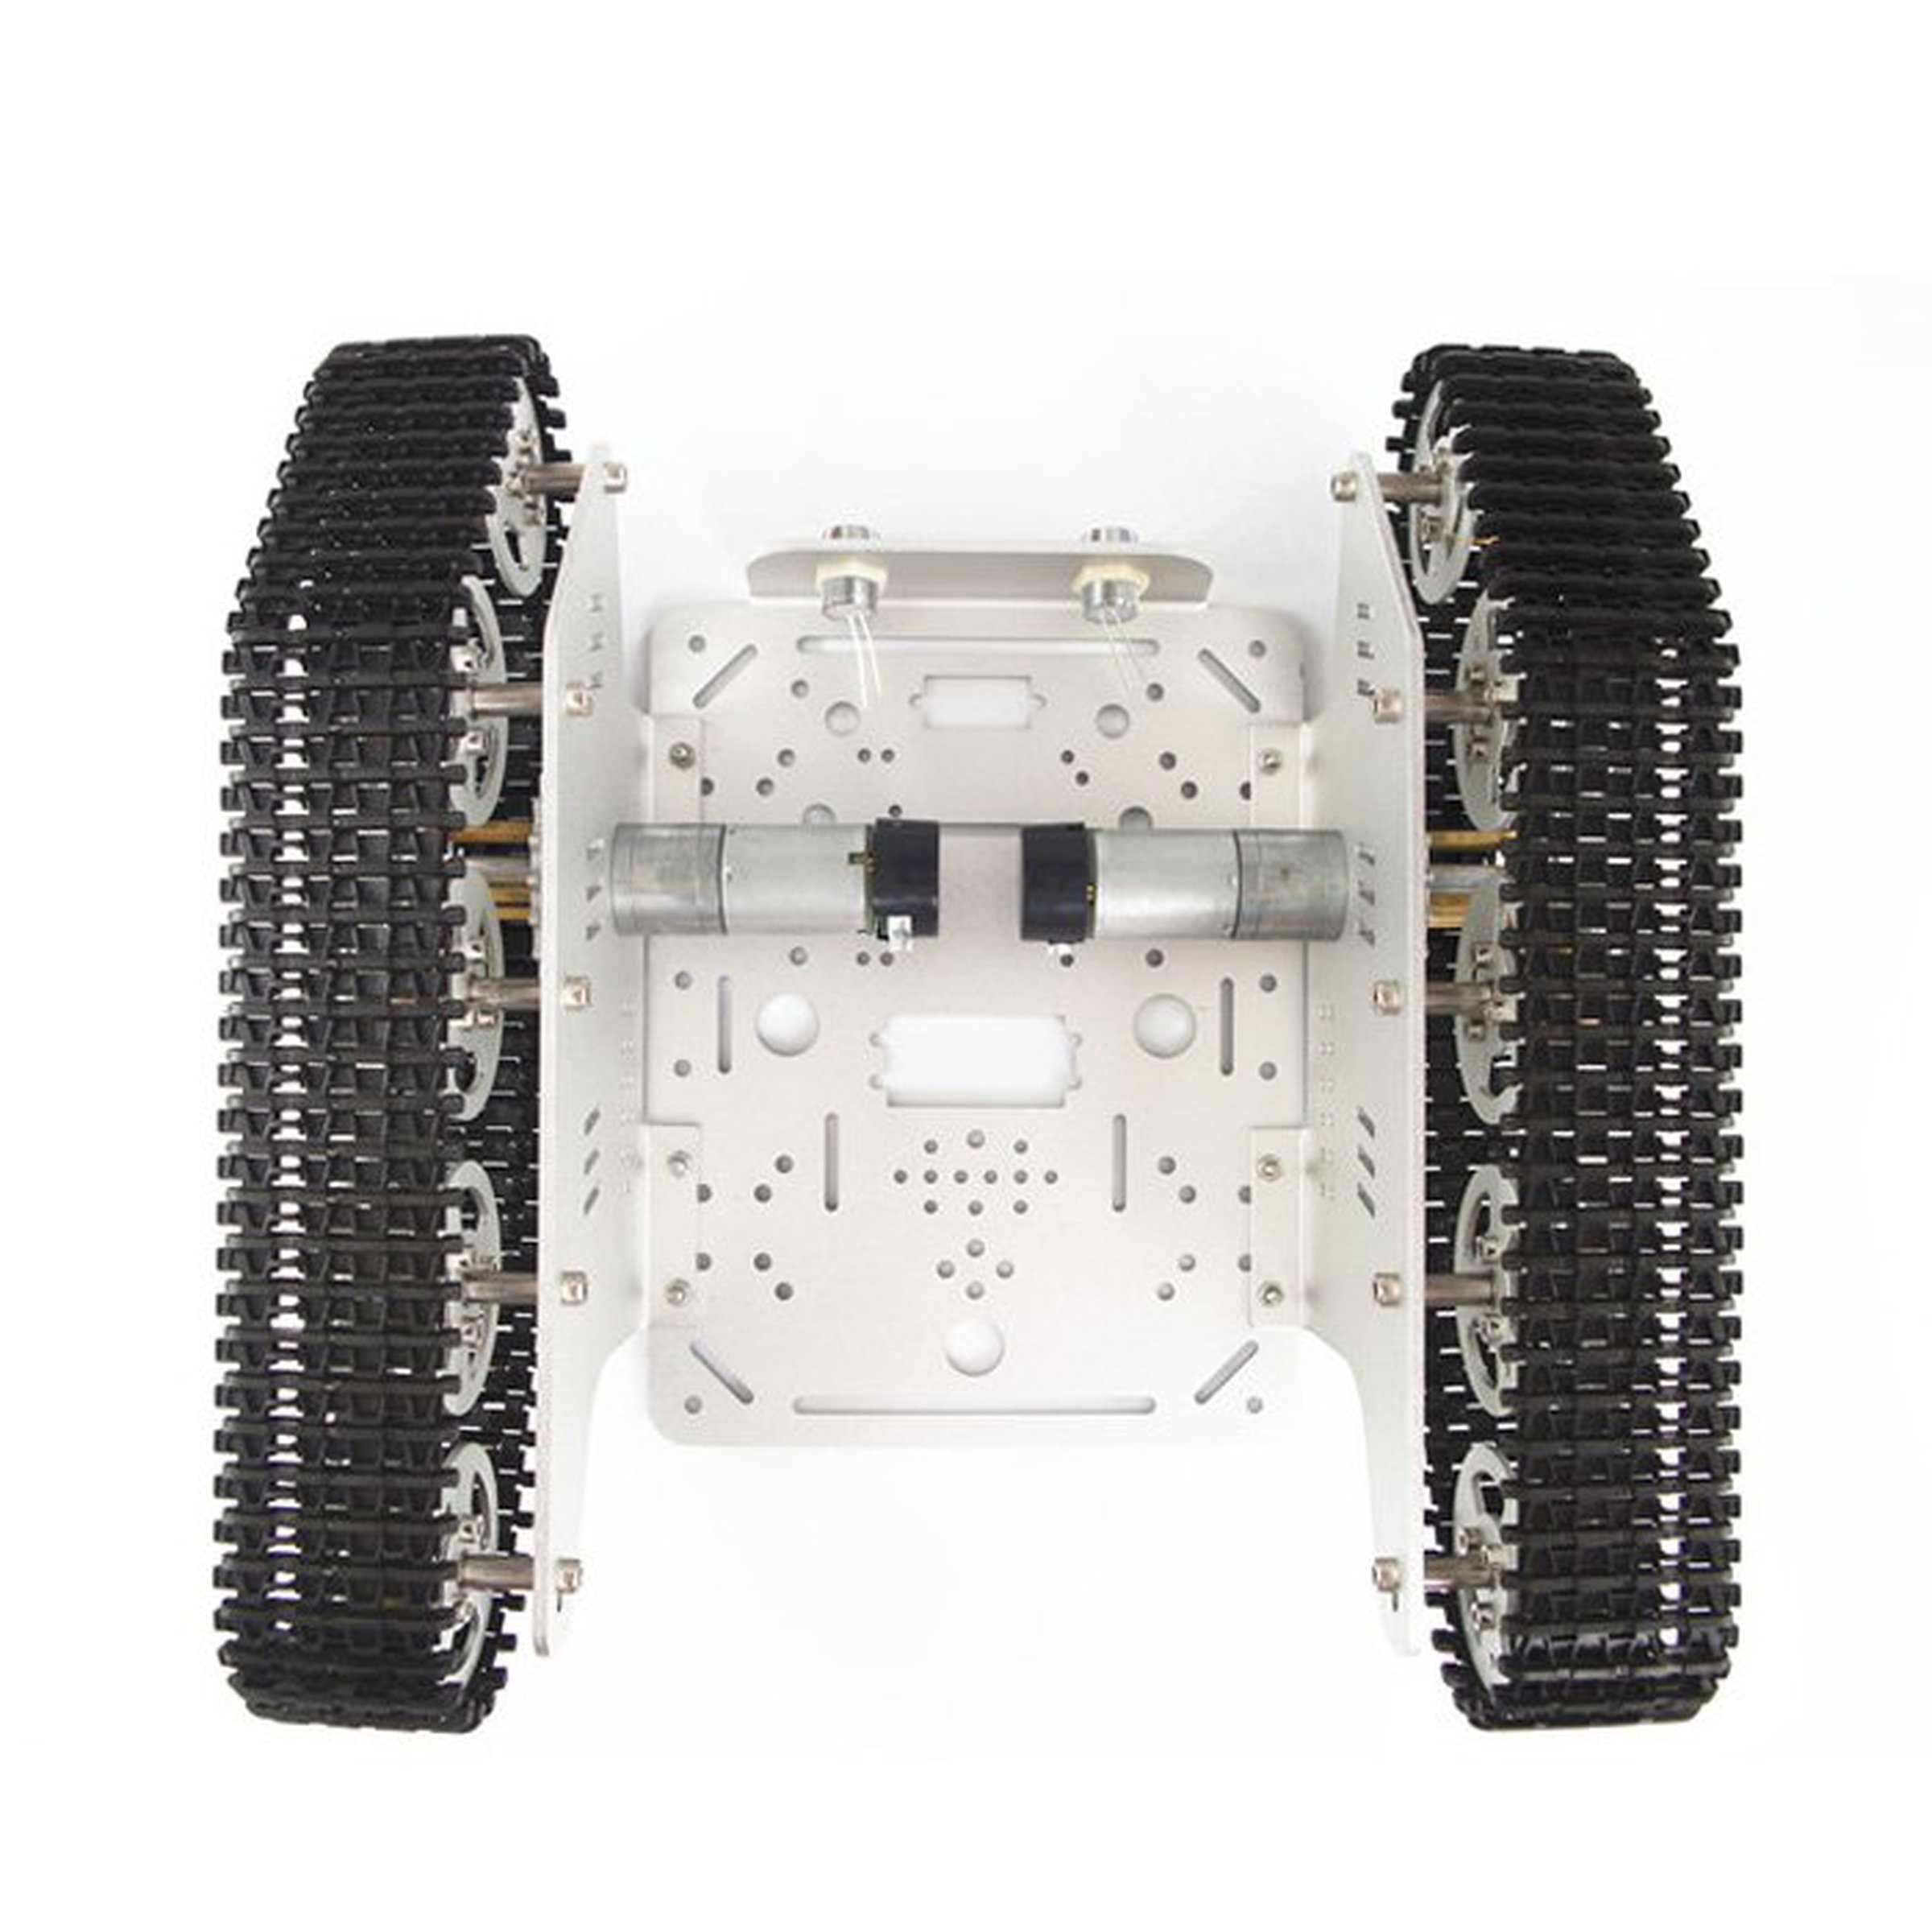 Metal Robot Tank Chassis Track from Smaring on Tindie